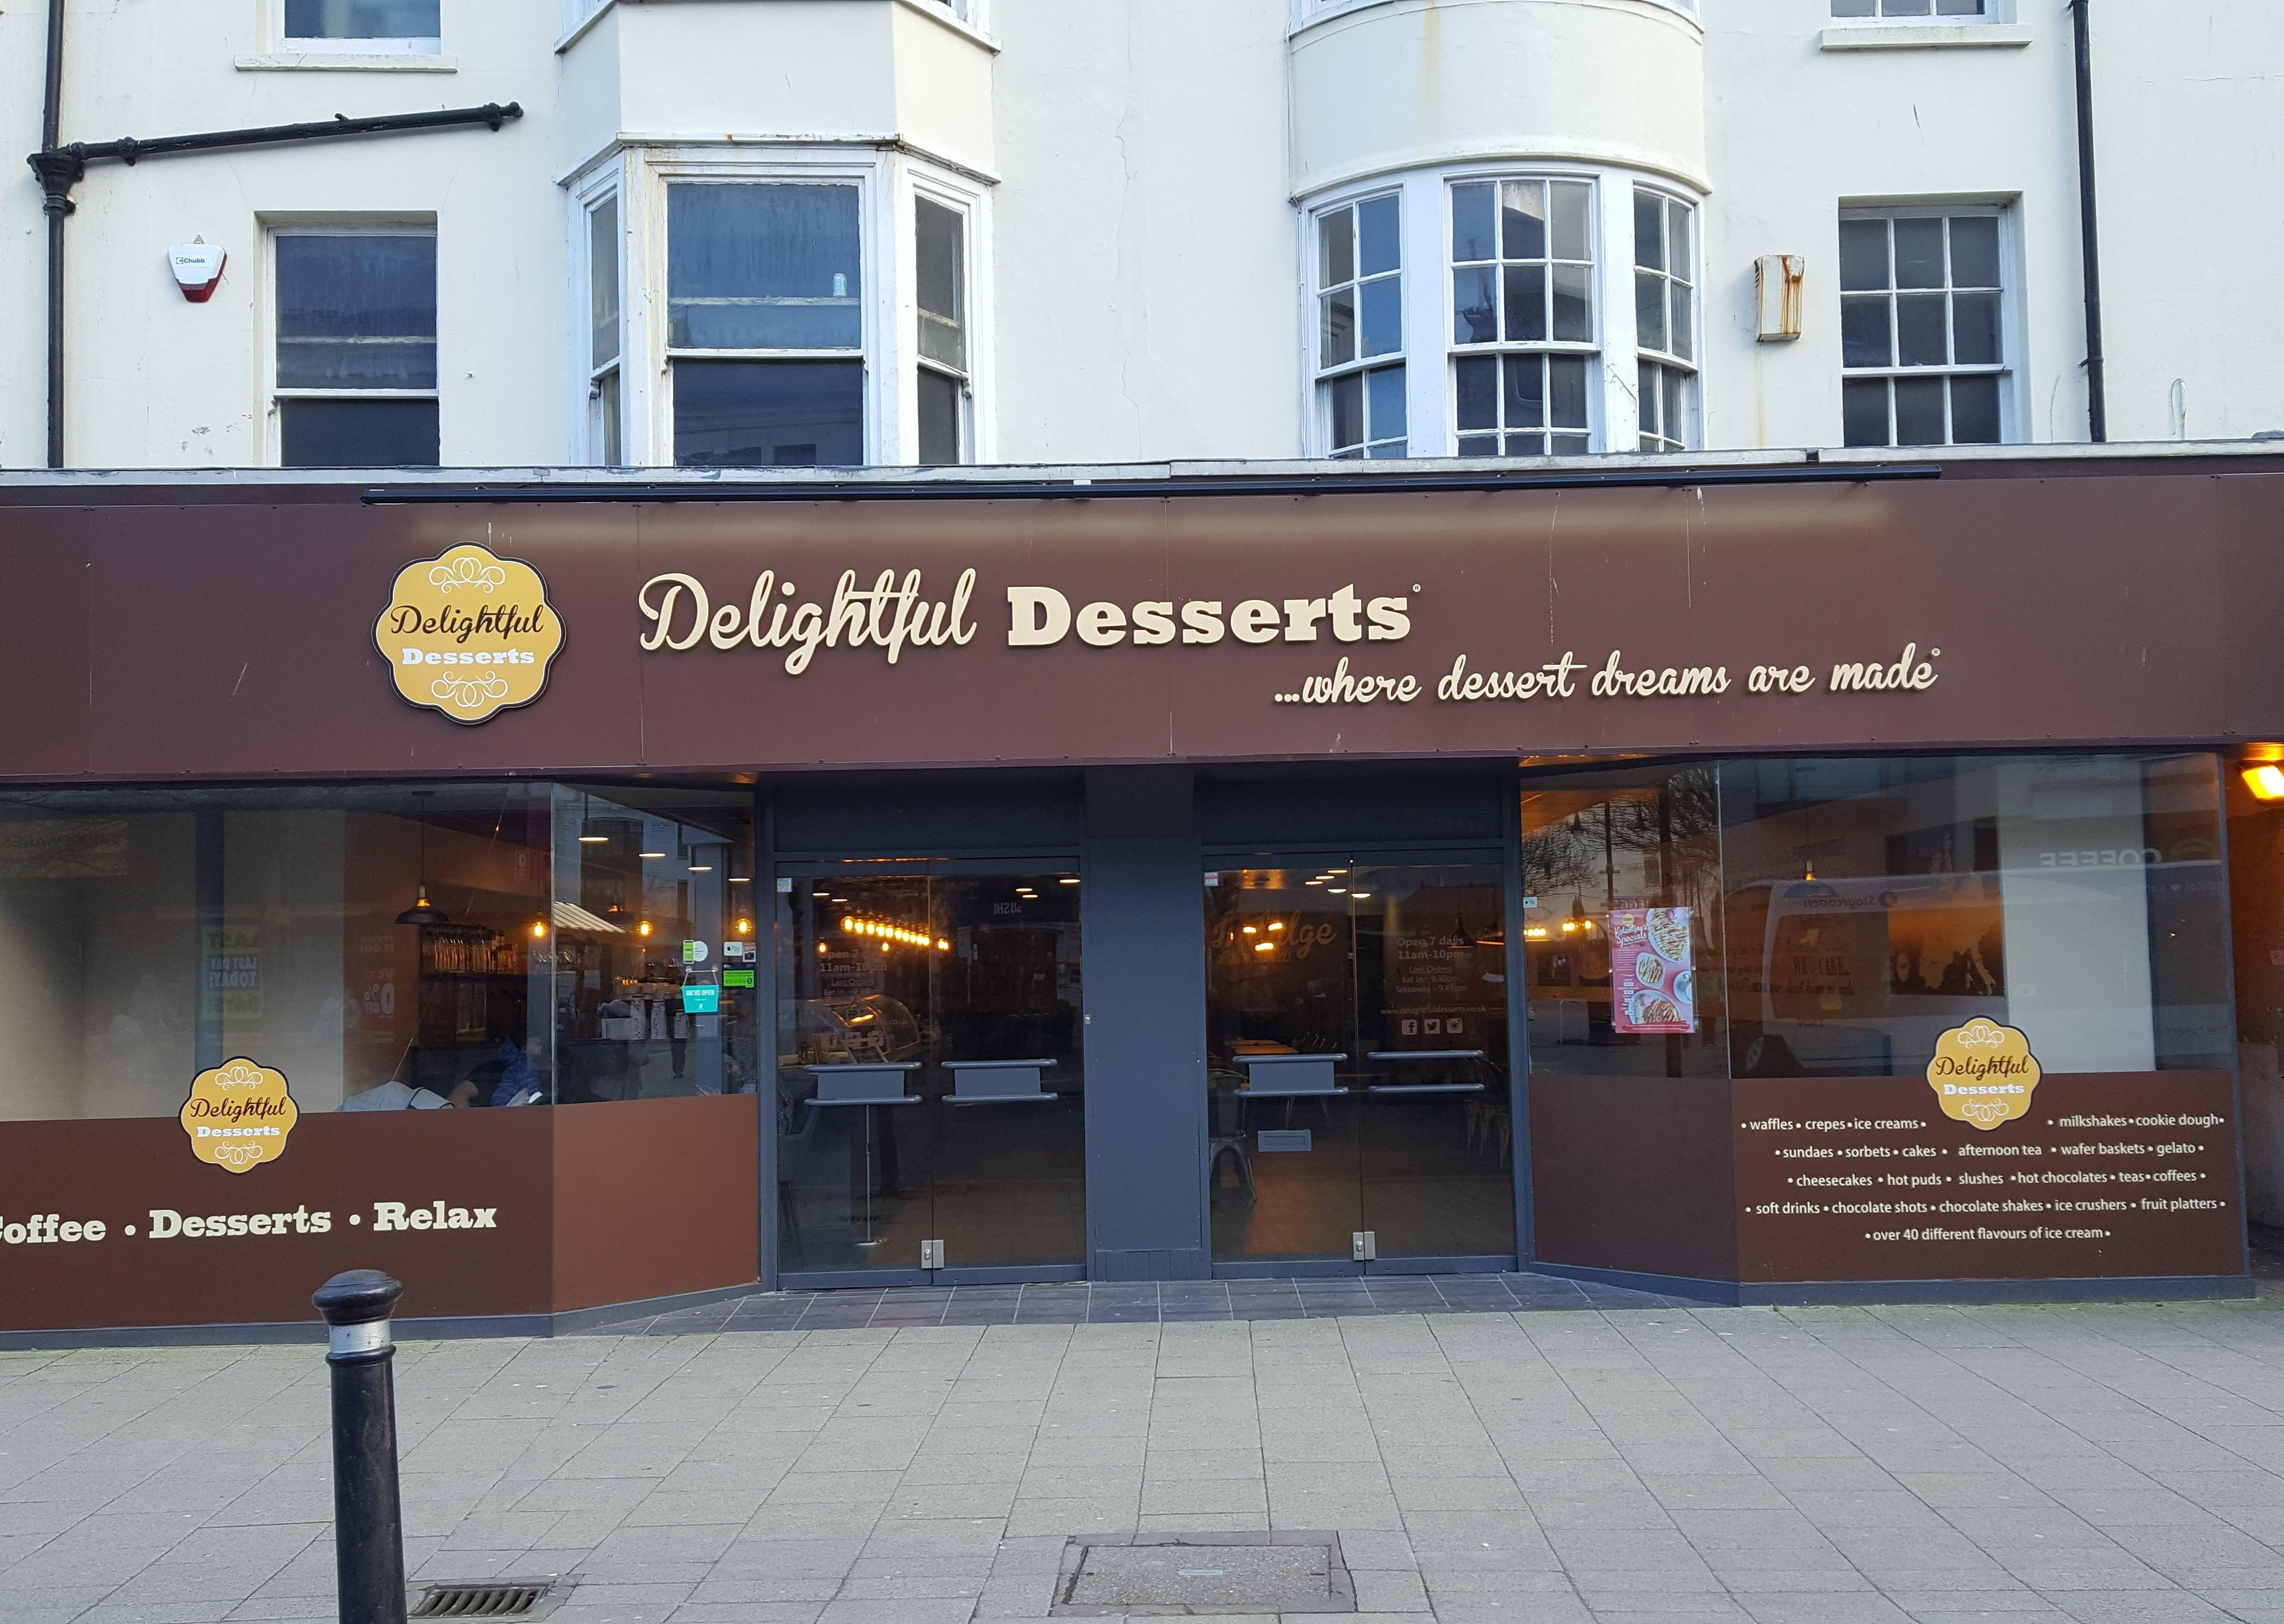 Adding to the town's impressive sweet treats offering, national chain Delightful Desserts opened in the former Blue Inc store last autumn